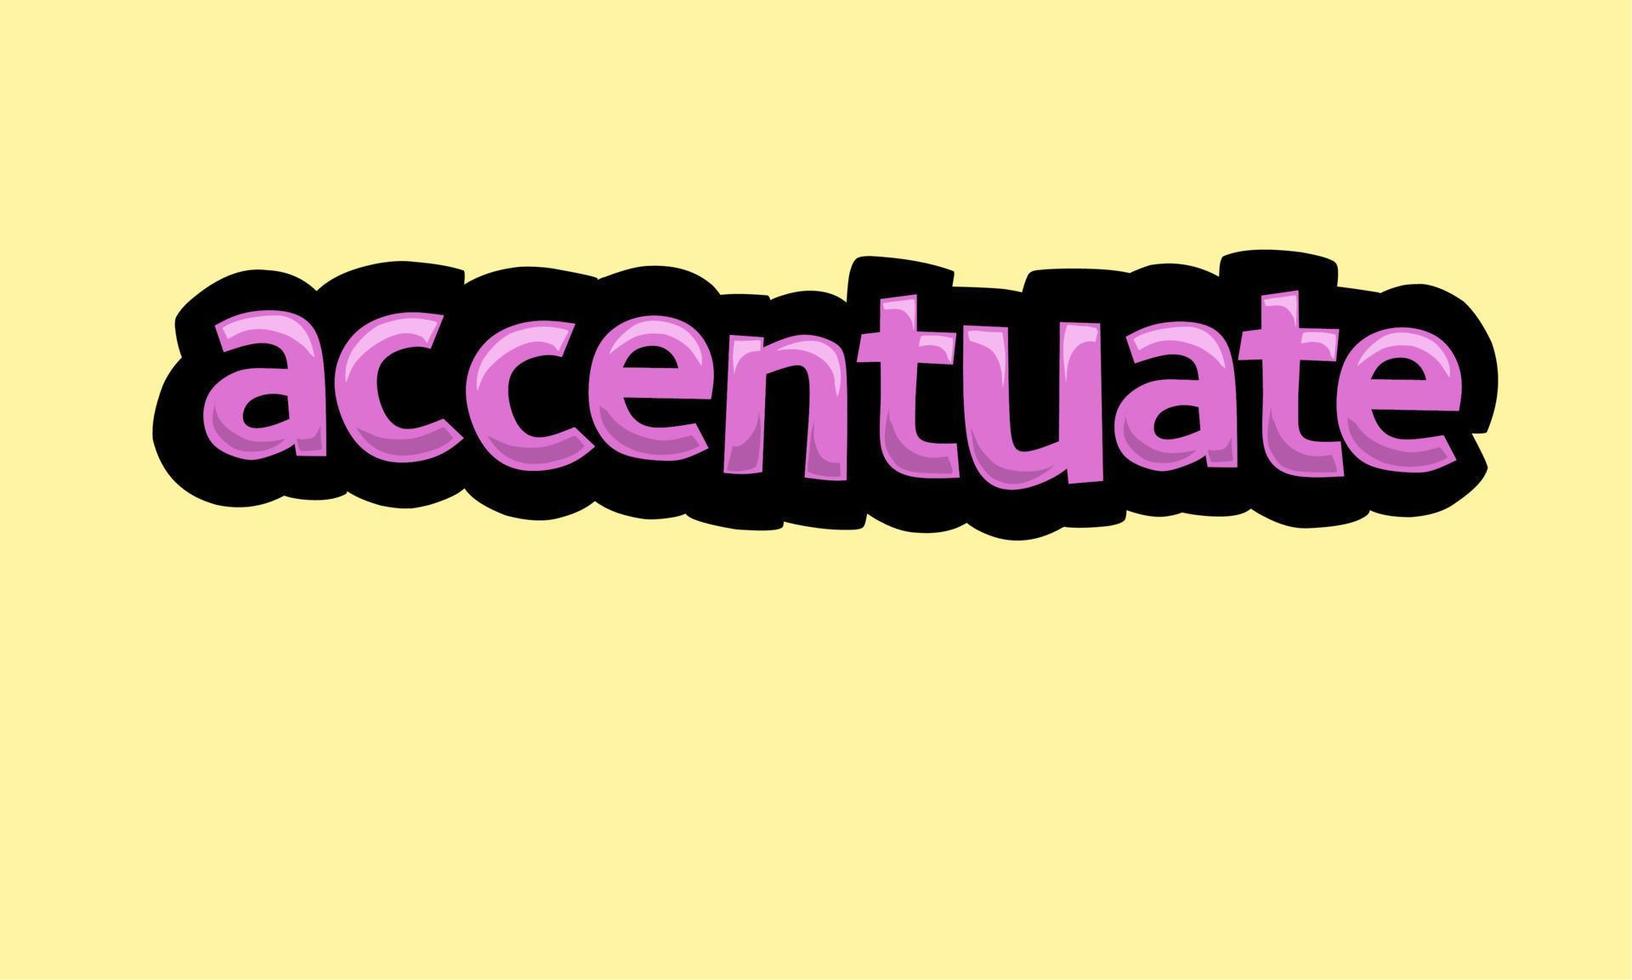 ACCENTUATE writing vector design on a yellow background